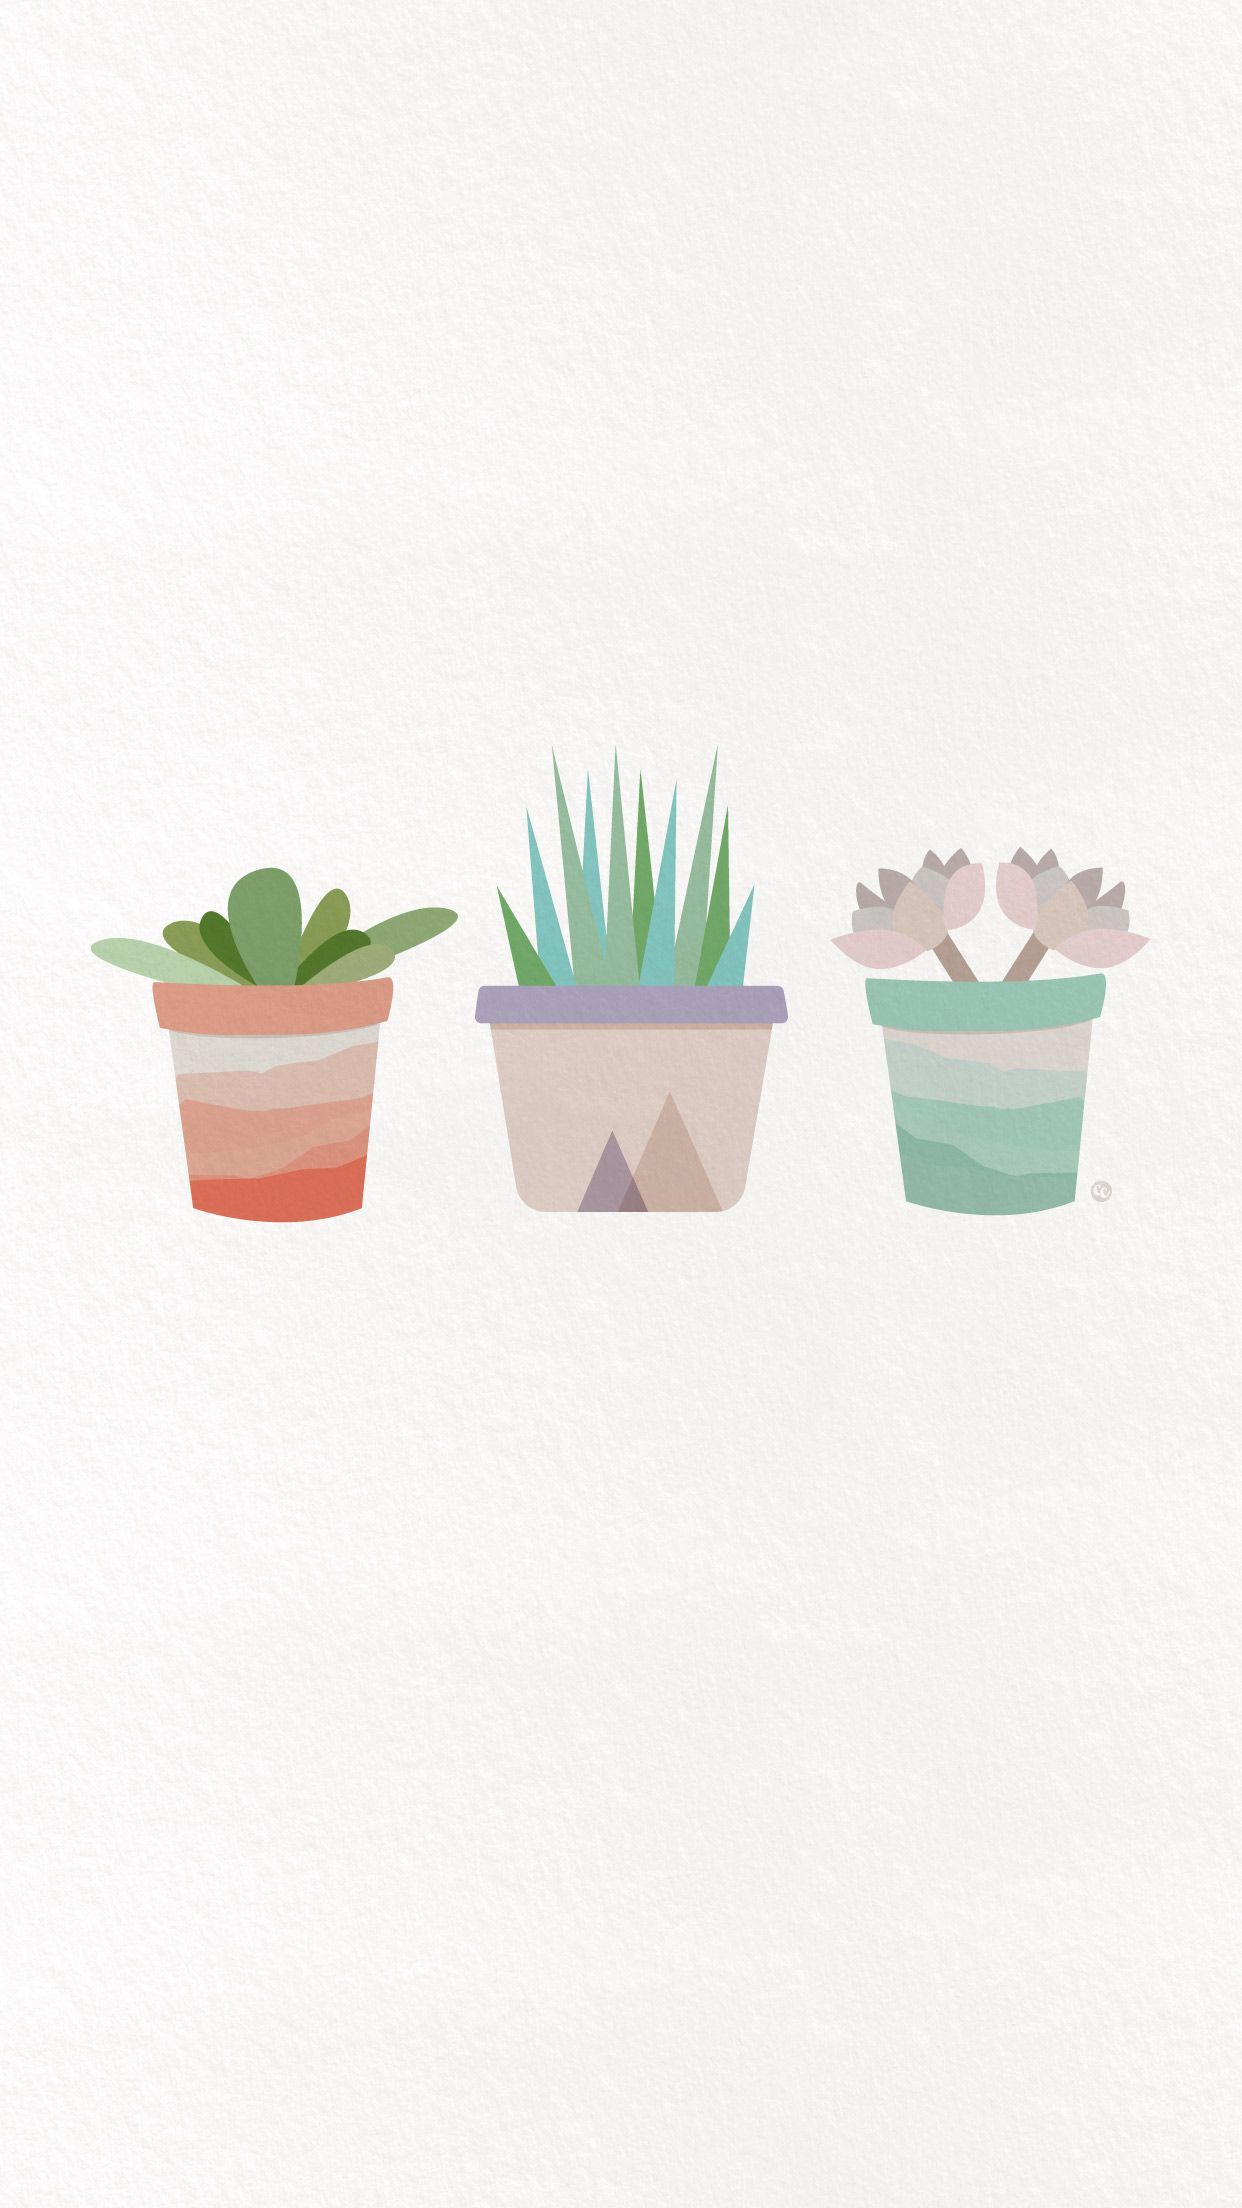 3 potted plants on a white background - Cactus, succulent